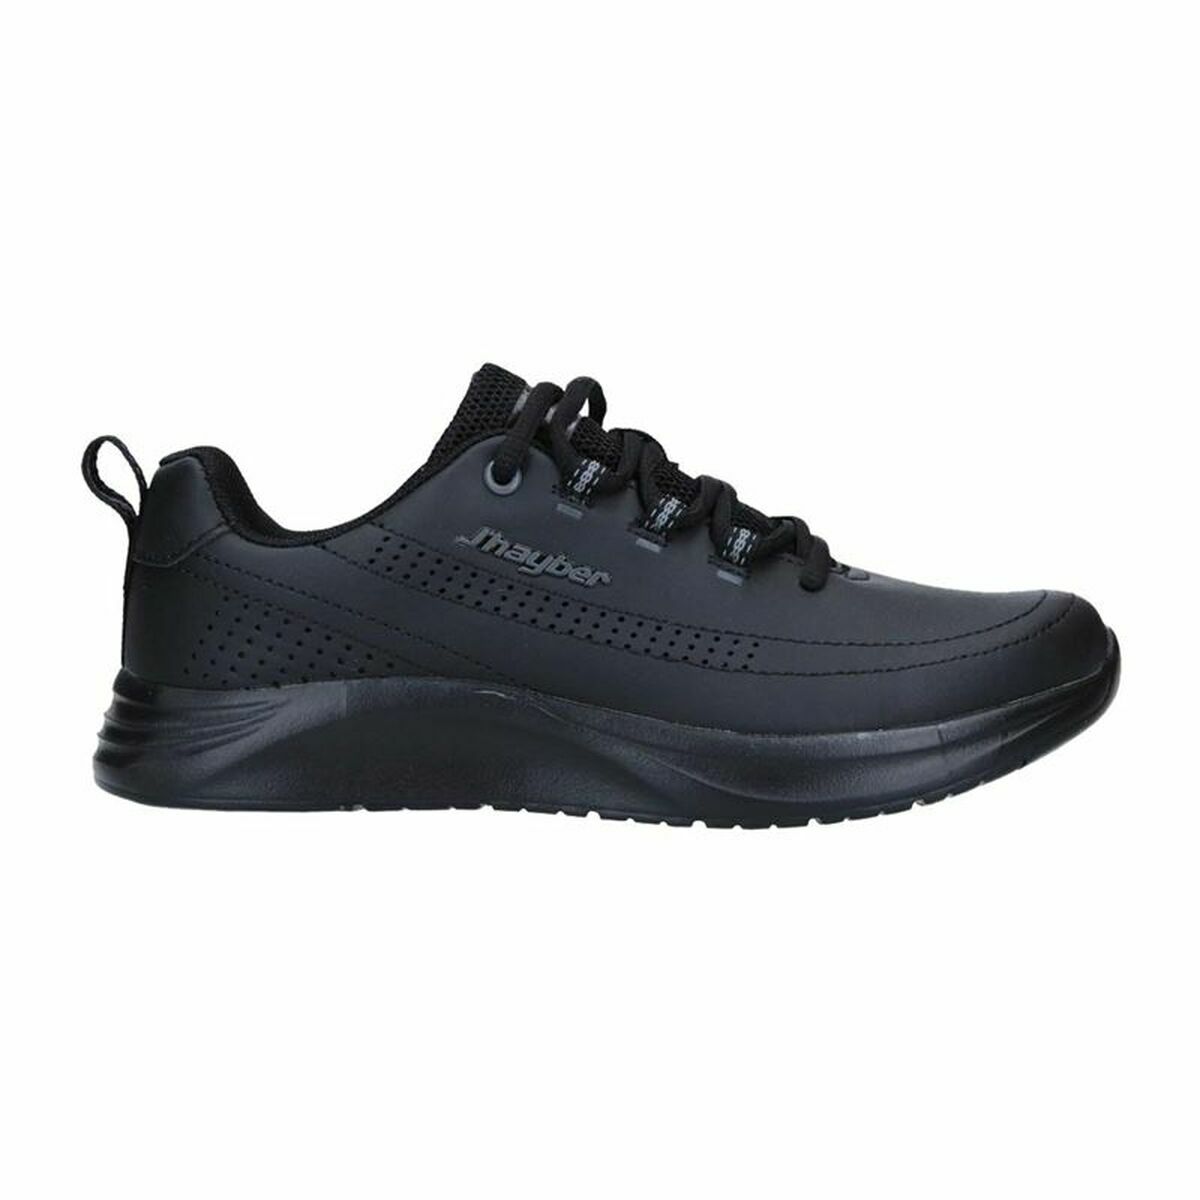 Sports Trainers for Women J-Hayber Chemi Black